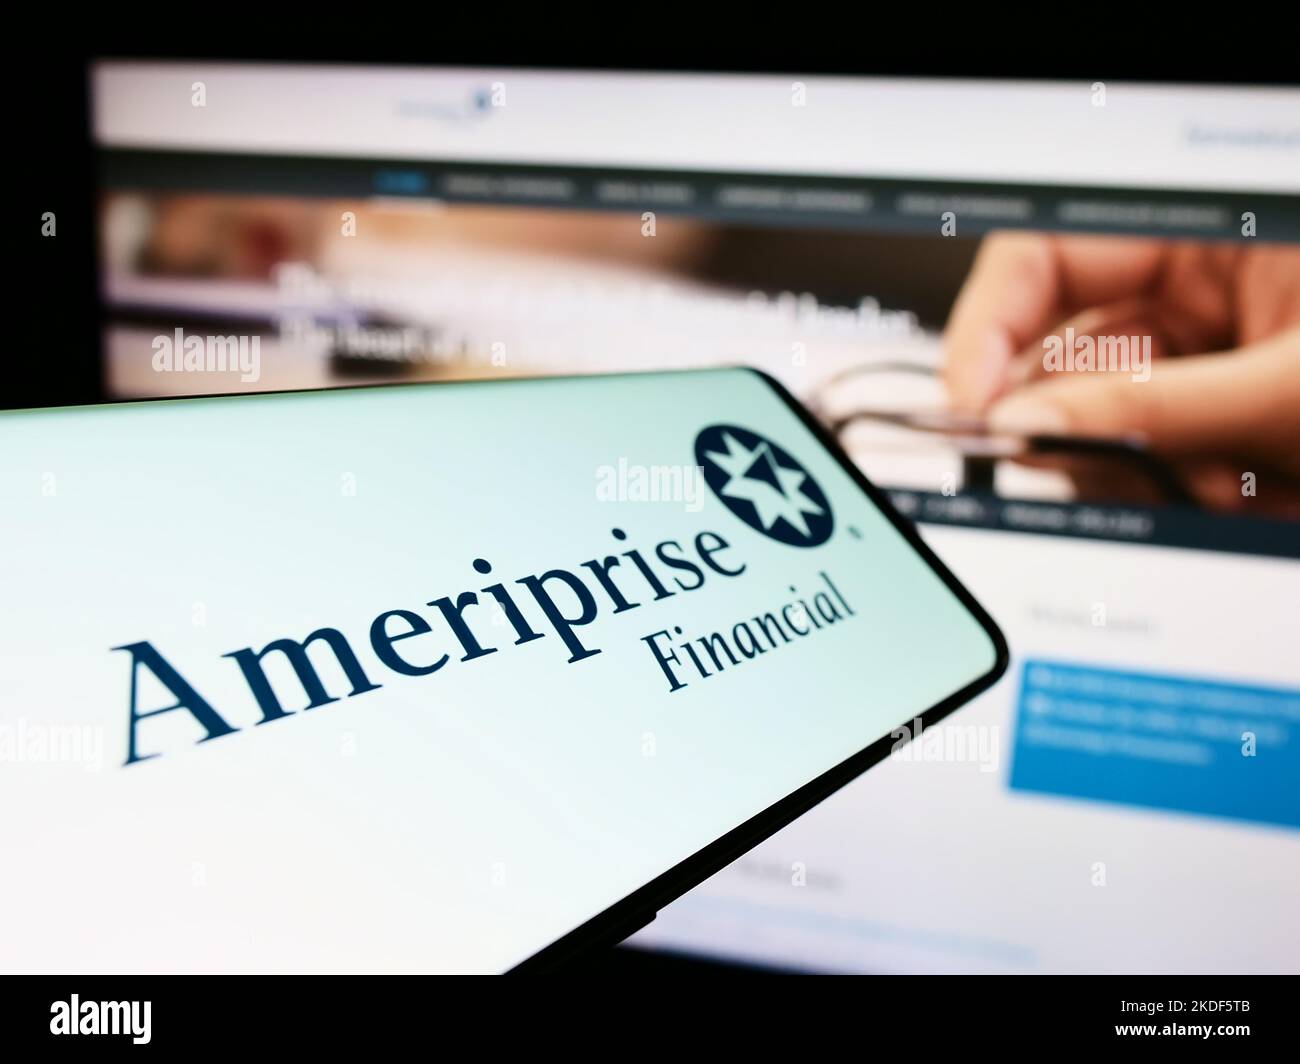 Smartphone with logo of American company Ameriprise Financial Inc. on screen in front of business website. Focus on center-right of phone display. Stock Photo